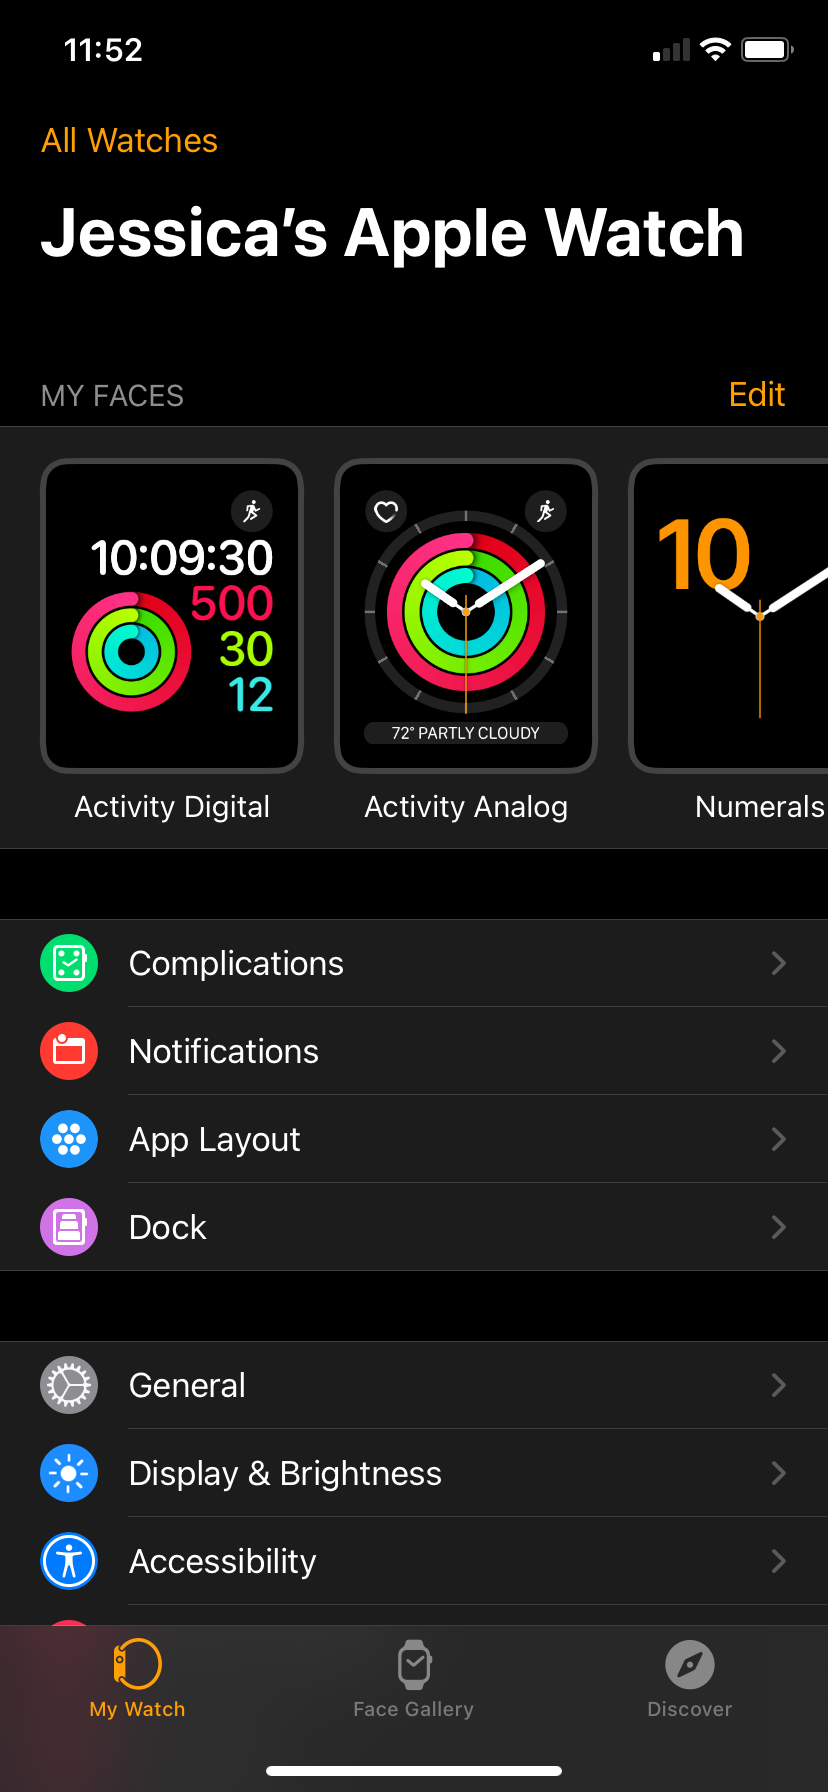 The My Watch tab in the Watch app on an iPhone